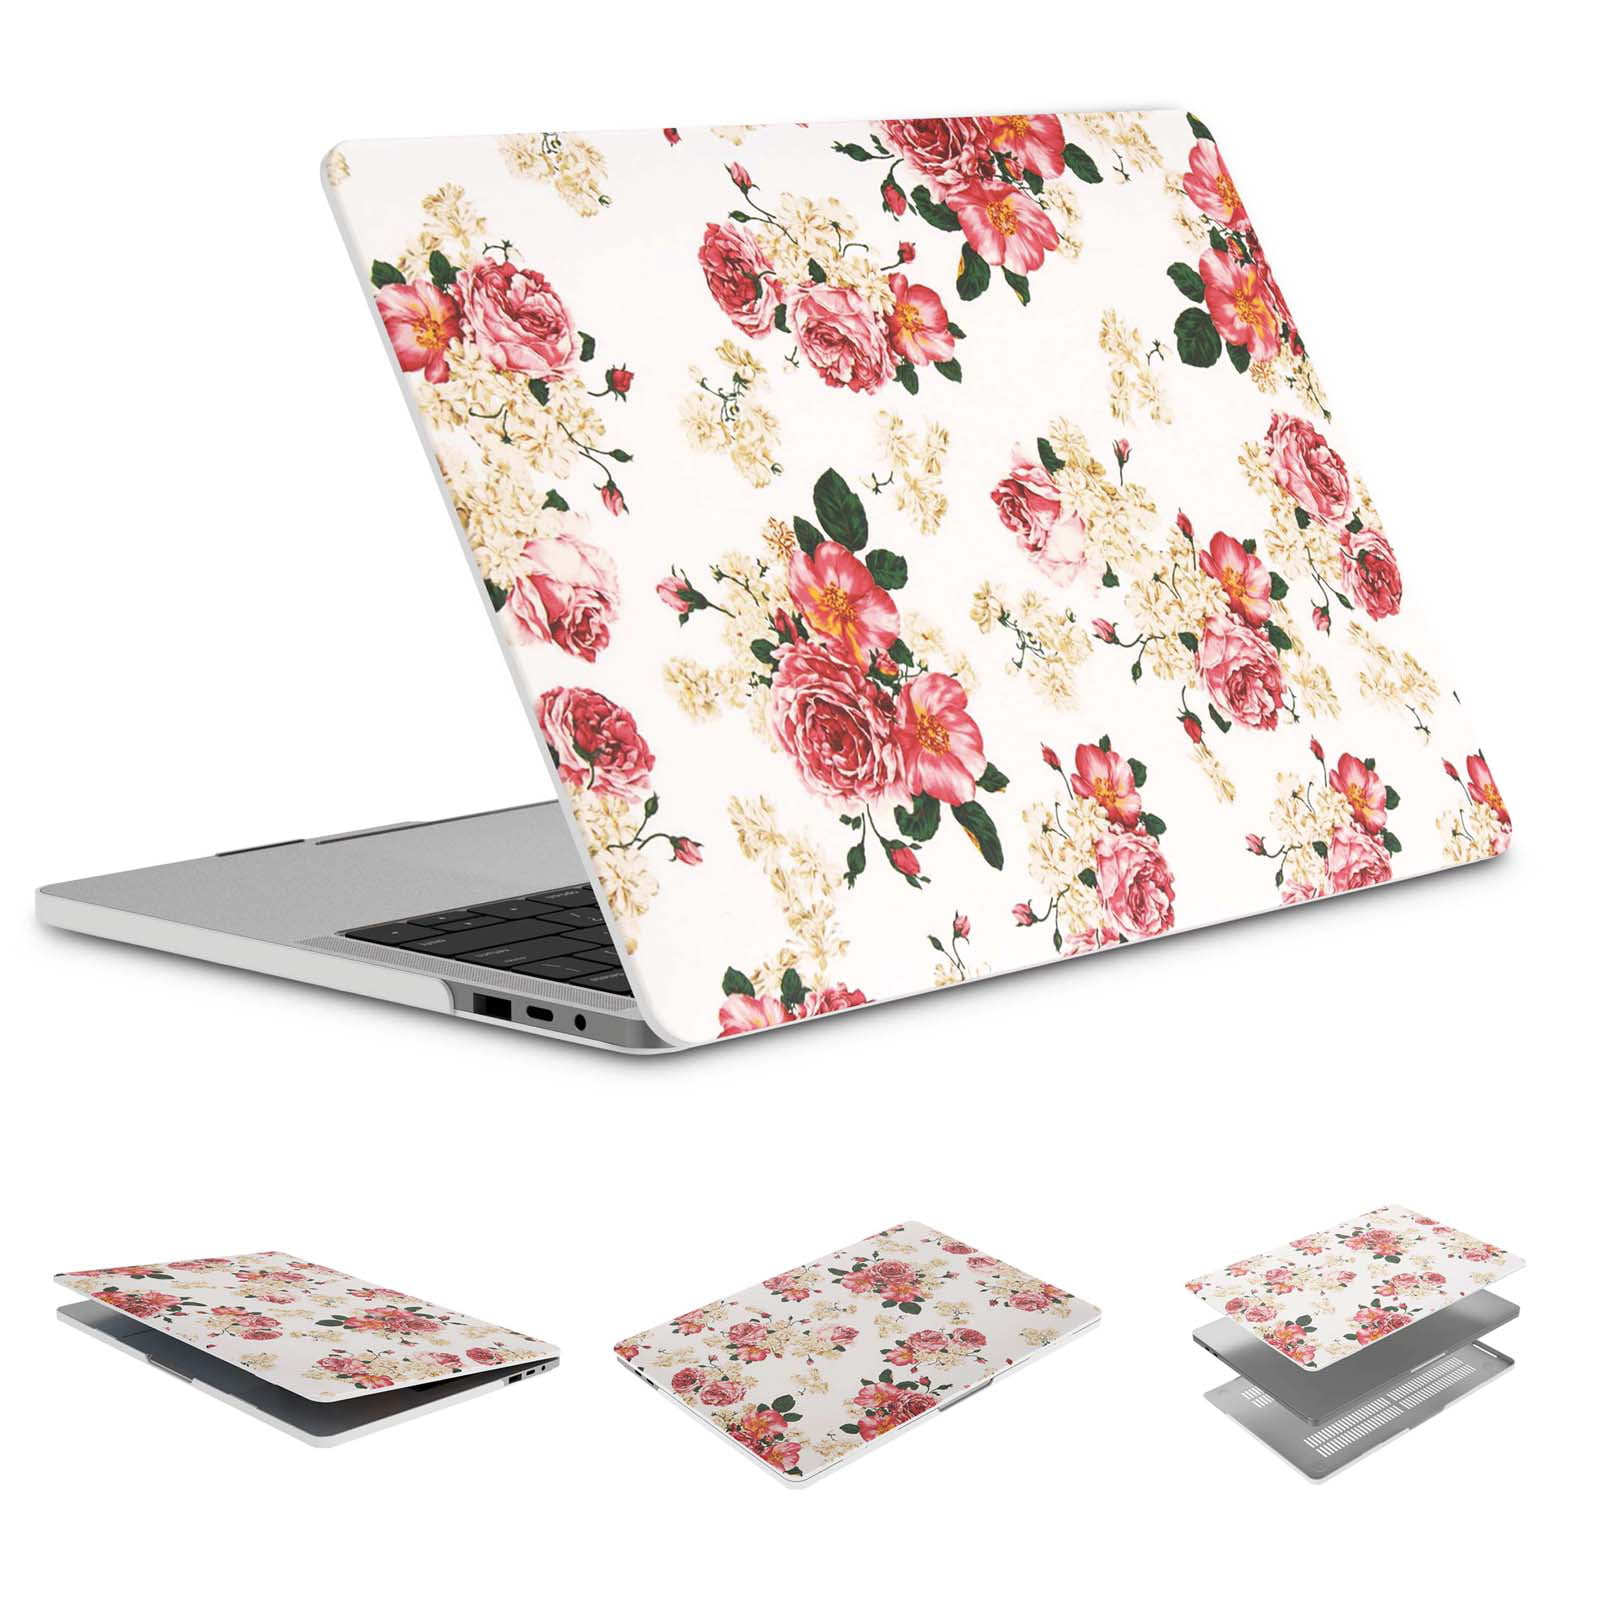 Summer Wild Flowers Hard Case For Apple Macbook 12 Air 11 13 Pro 13 15 2016/2017 Inch Retina Display Touch Bar 